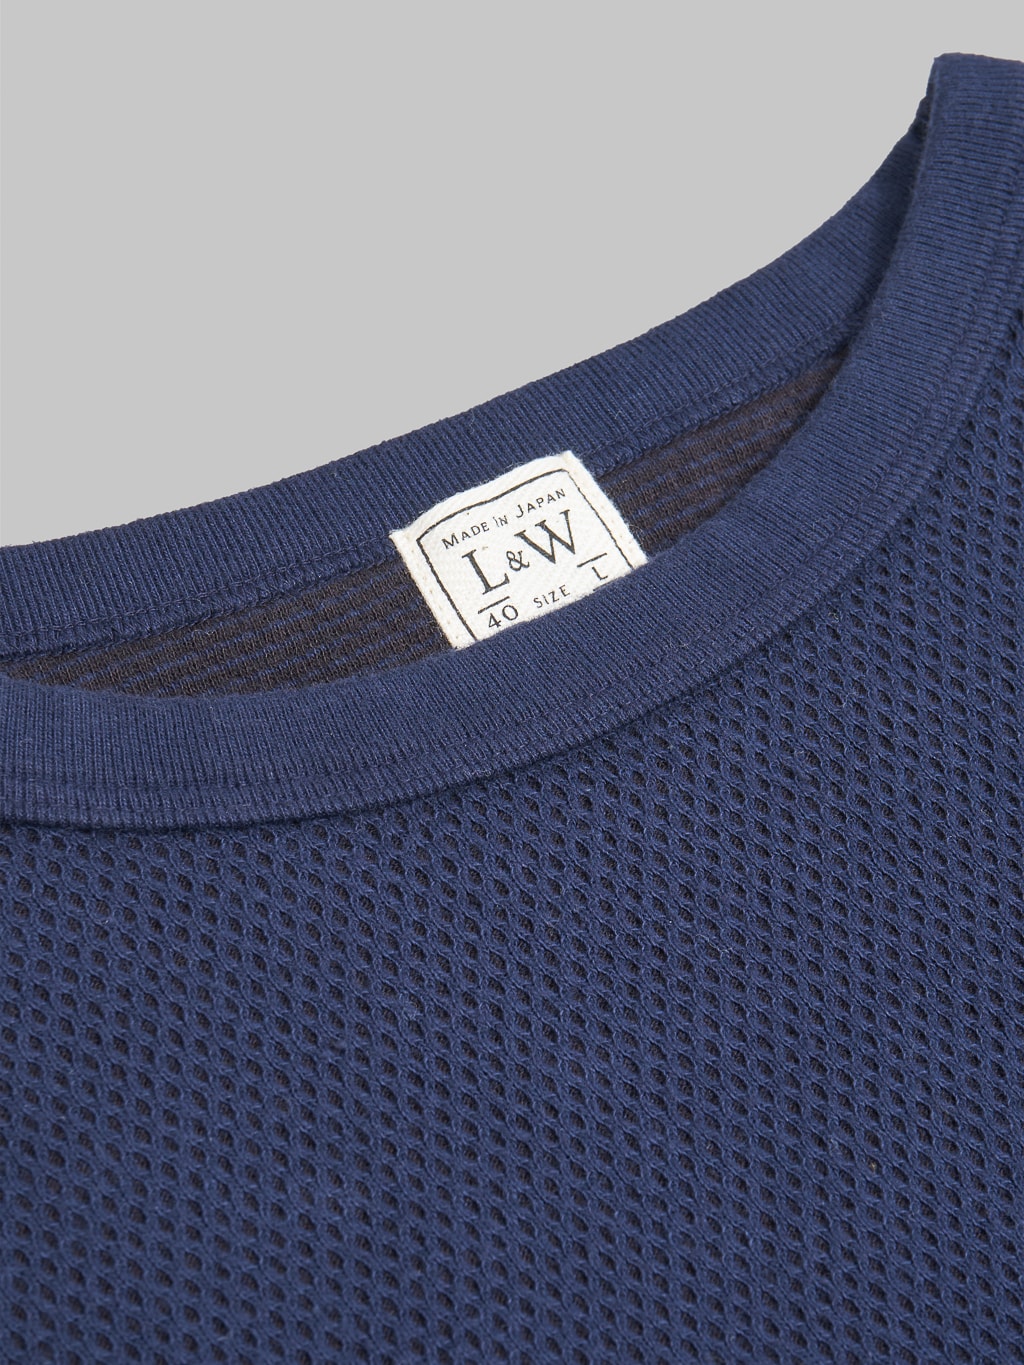 Loop & Weft Double Face Hex Honeycomb Crewneck Thermal Royal Navy